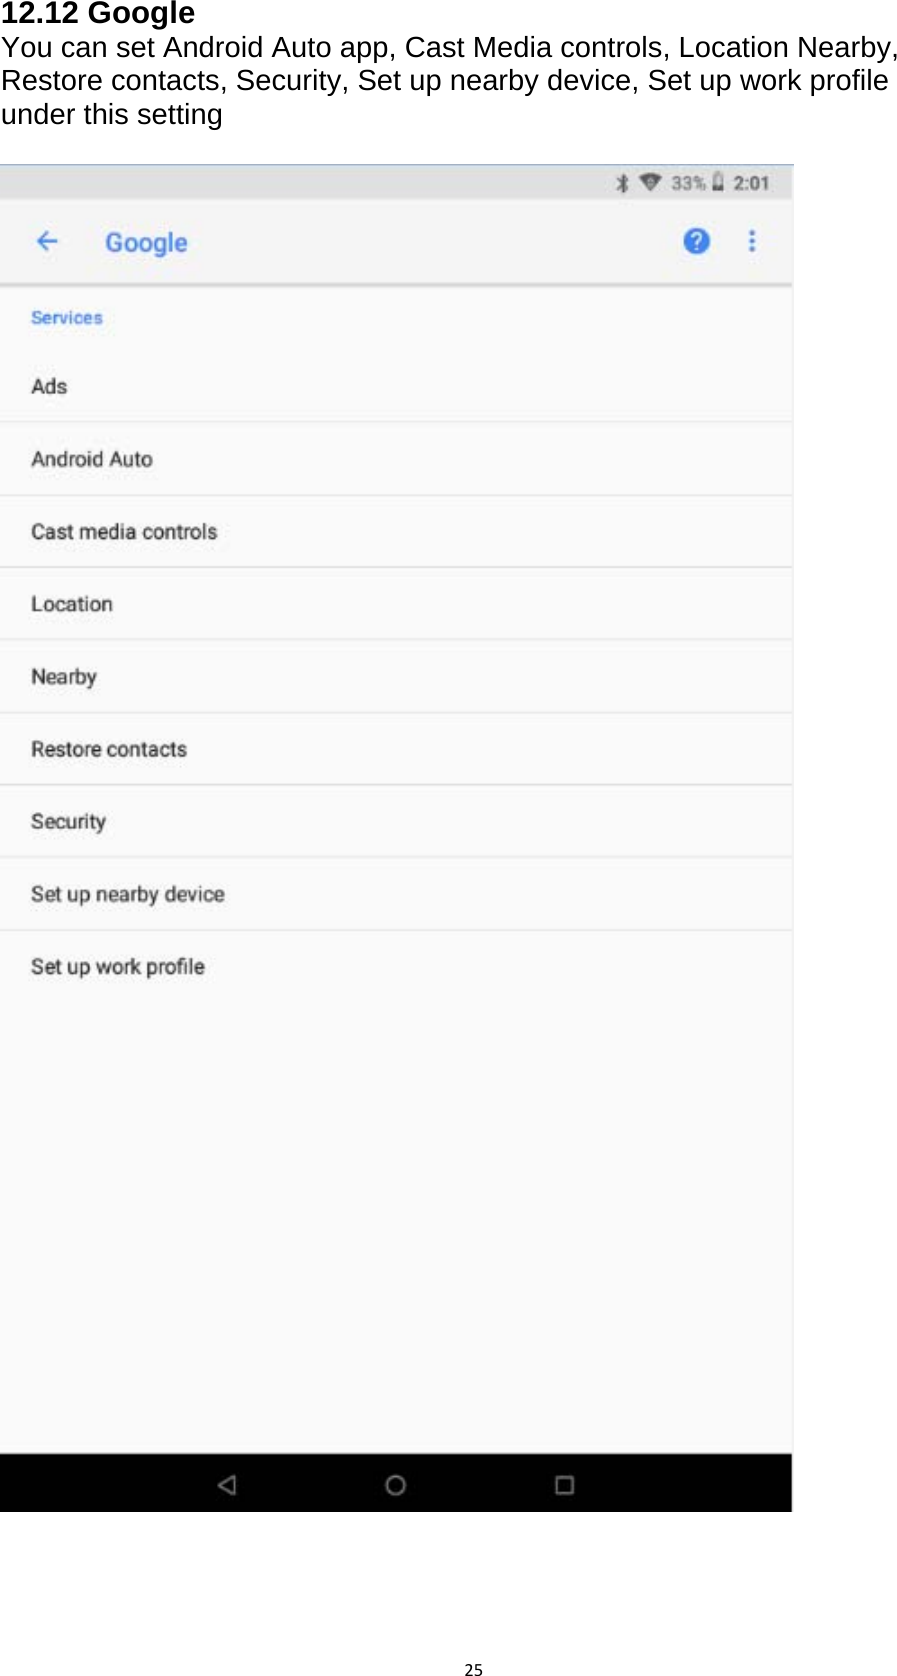 2512.12 Google  You can set Android Auto app, Cast Media controls, Location Nearby, Restore contacts, Security, Set up nearby device, Set up work profile under this setting       